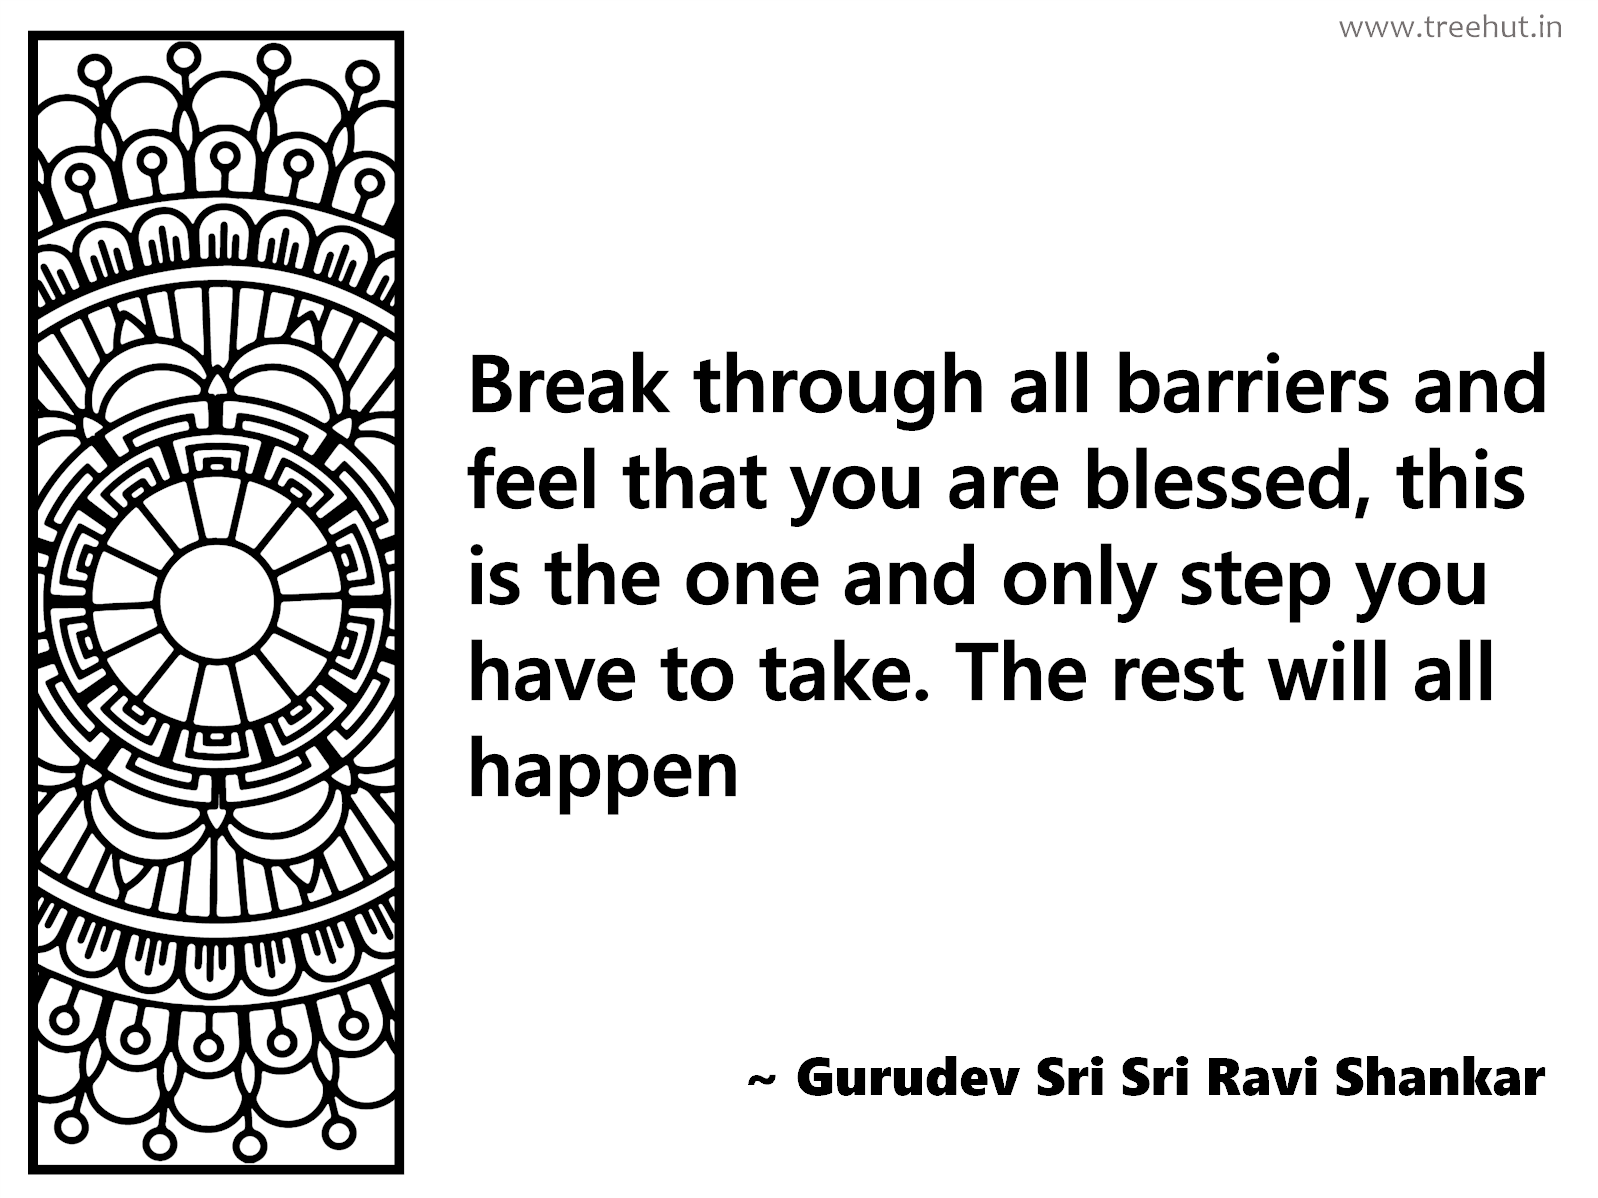 Break through all barriers and feel that you are blessed, this is the one and only step you have to take. The rest will all happen Inspirational Quote by Gurudev Sri Sri Ravi Shankar, coloring pages